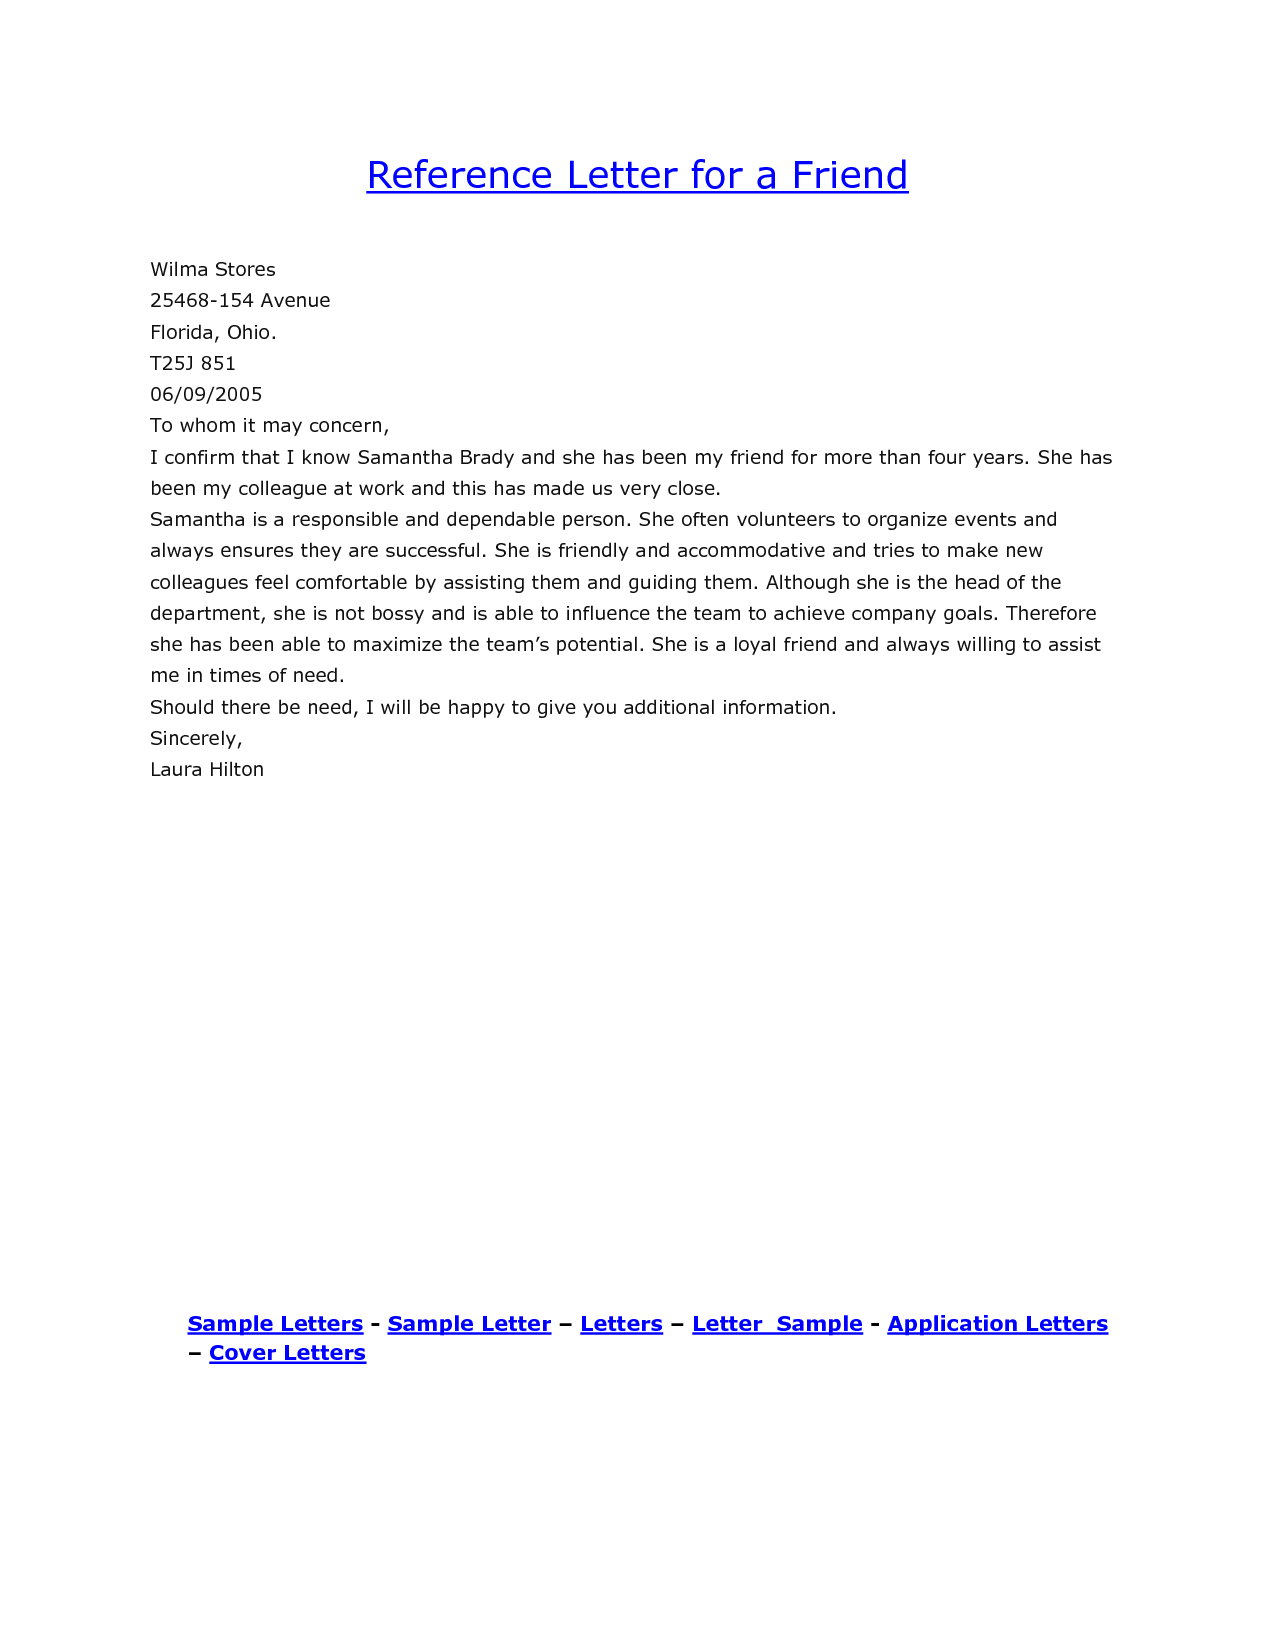 Personal Reference Letter For A Friend Personal Reference inside sizing 1275 X 1650